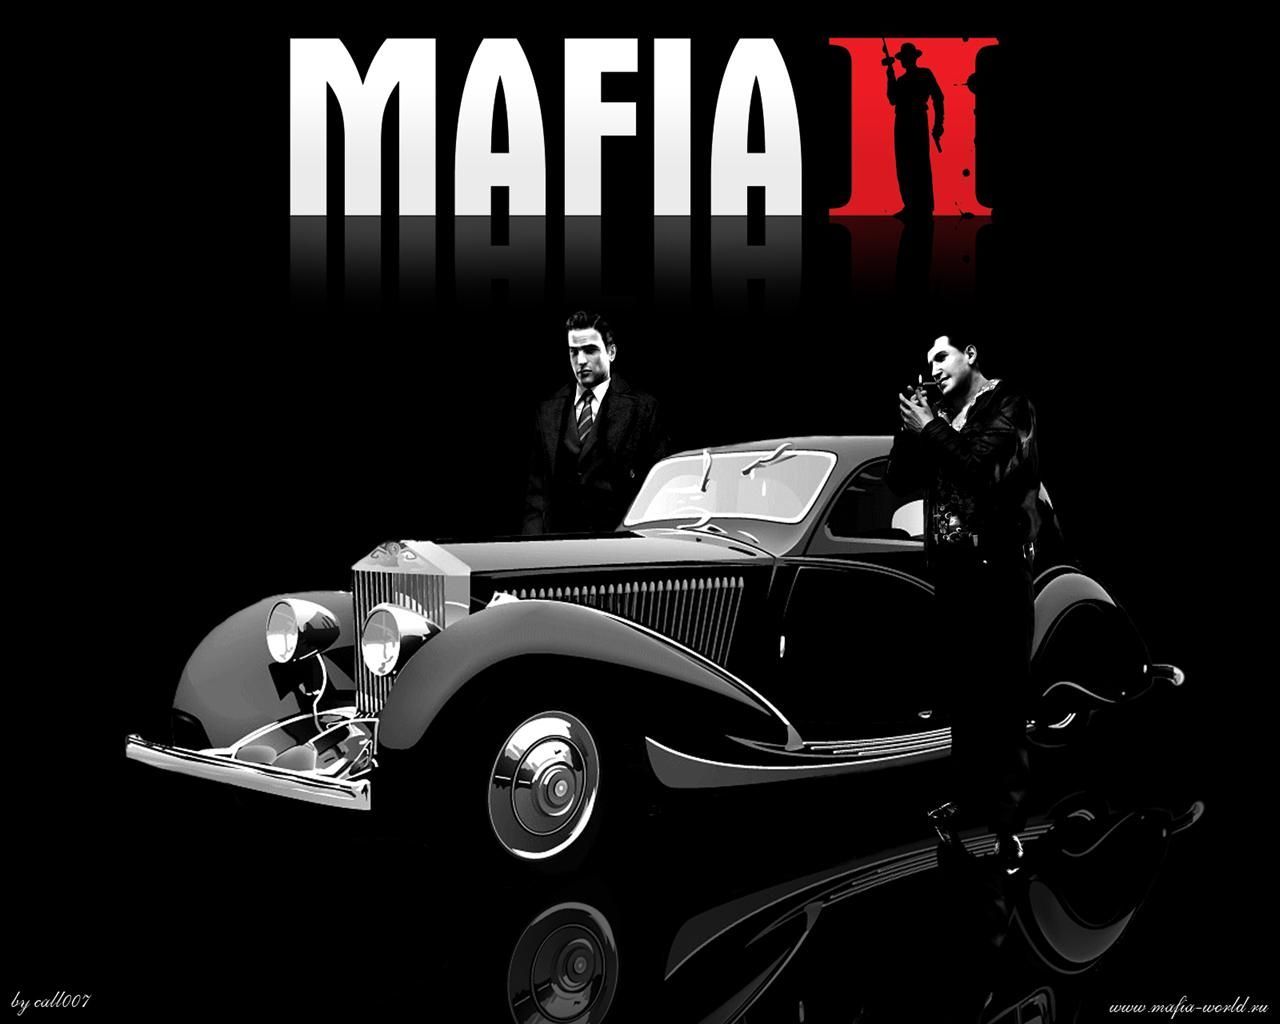 Mafia free Wallpapers 44 photos for your desktop, download pictures